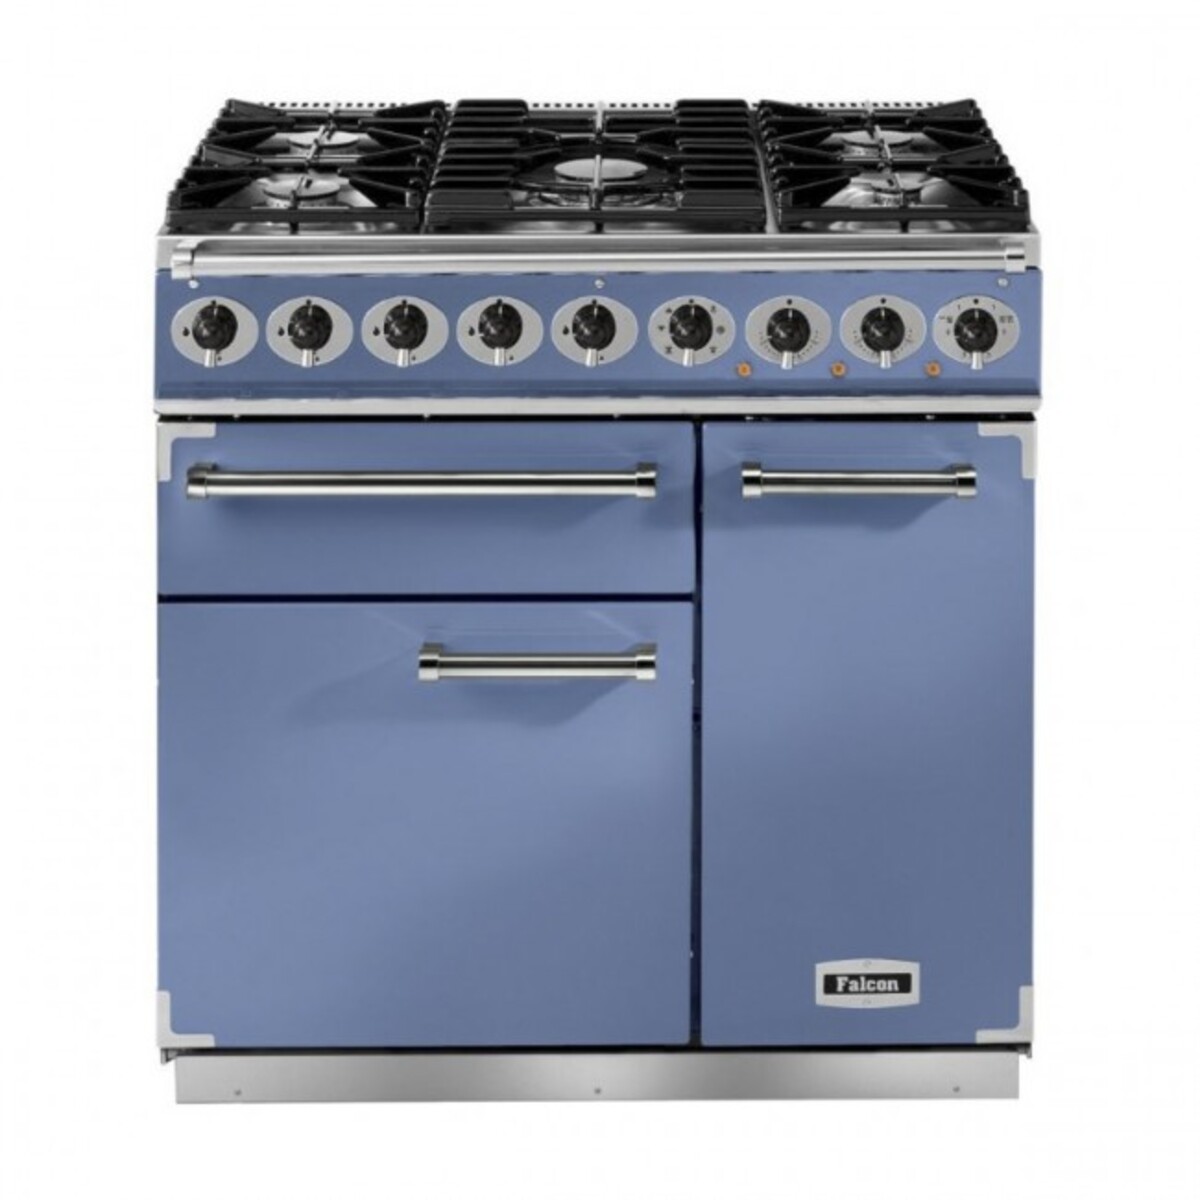 FALCON F900DXDFCANM 80850 - 90cm Deluxe Dual Fuel Range Cooker, China Blue